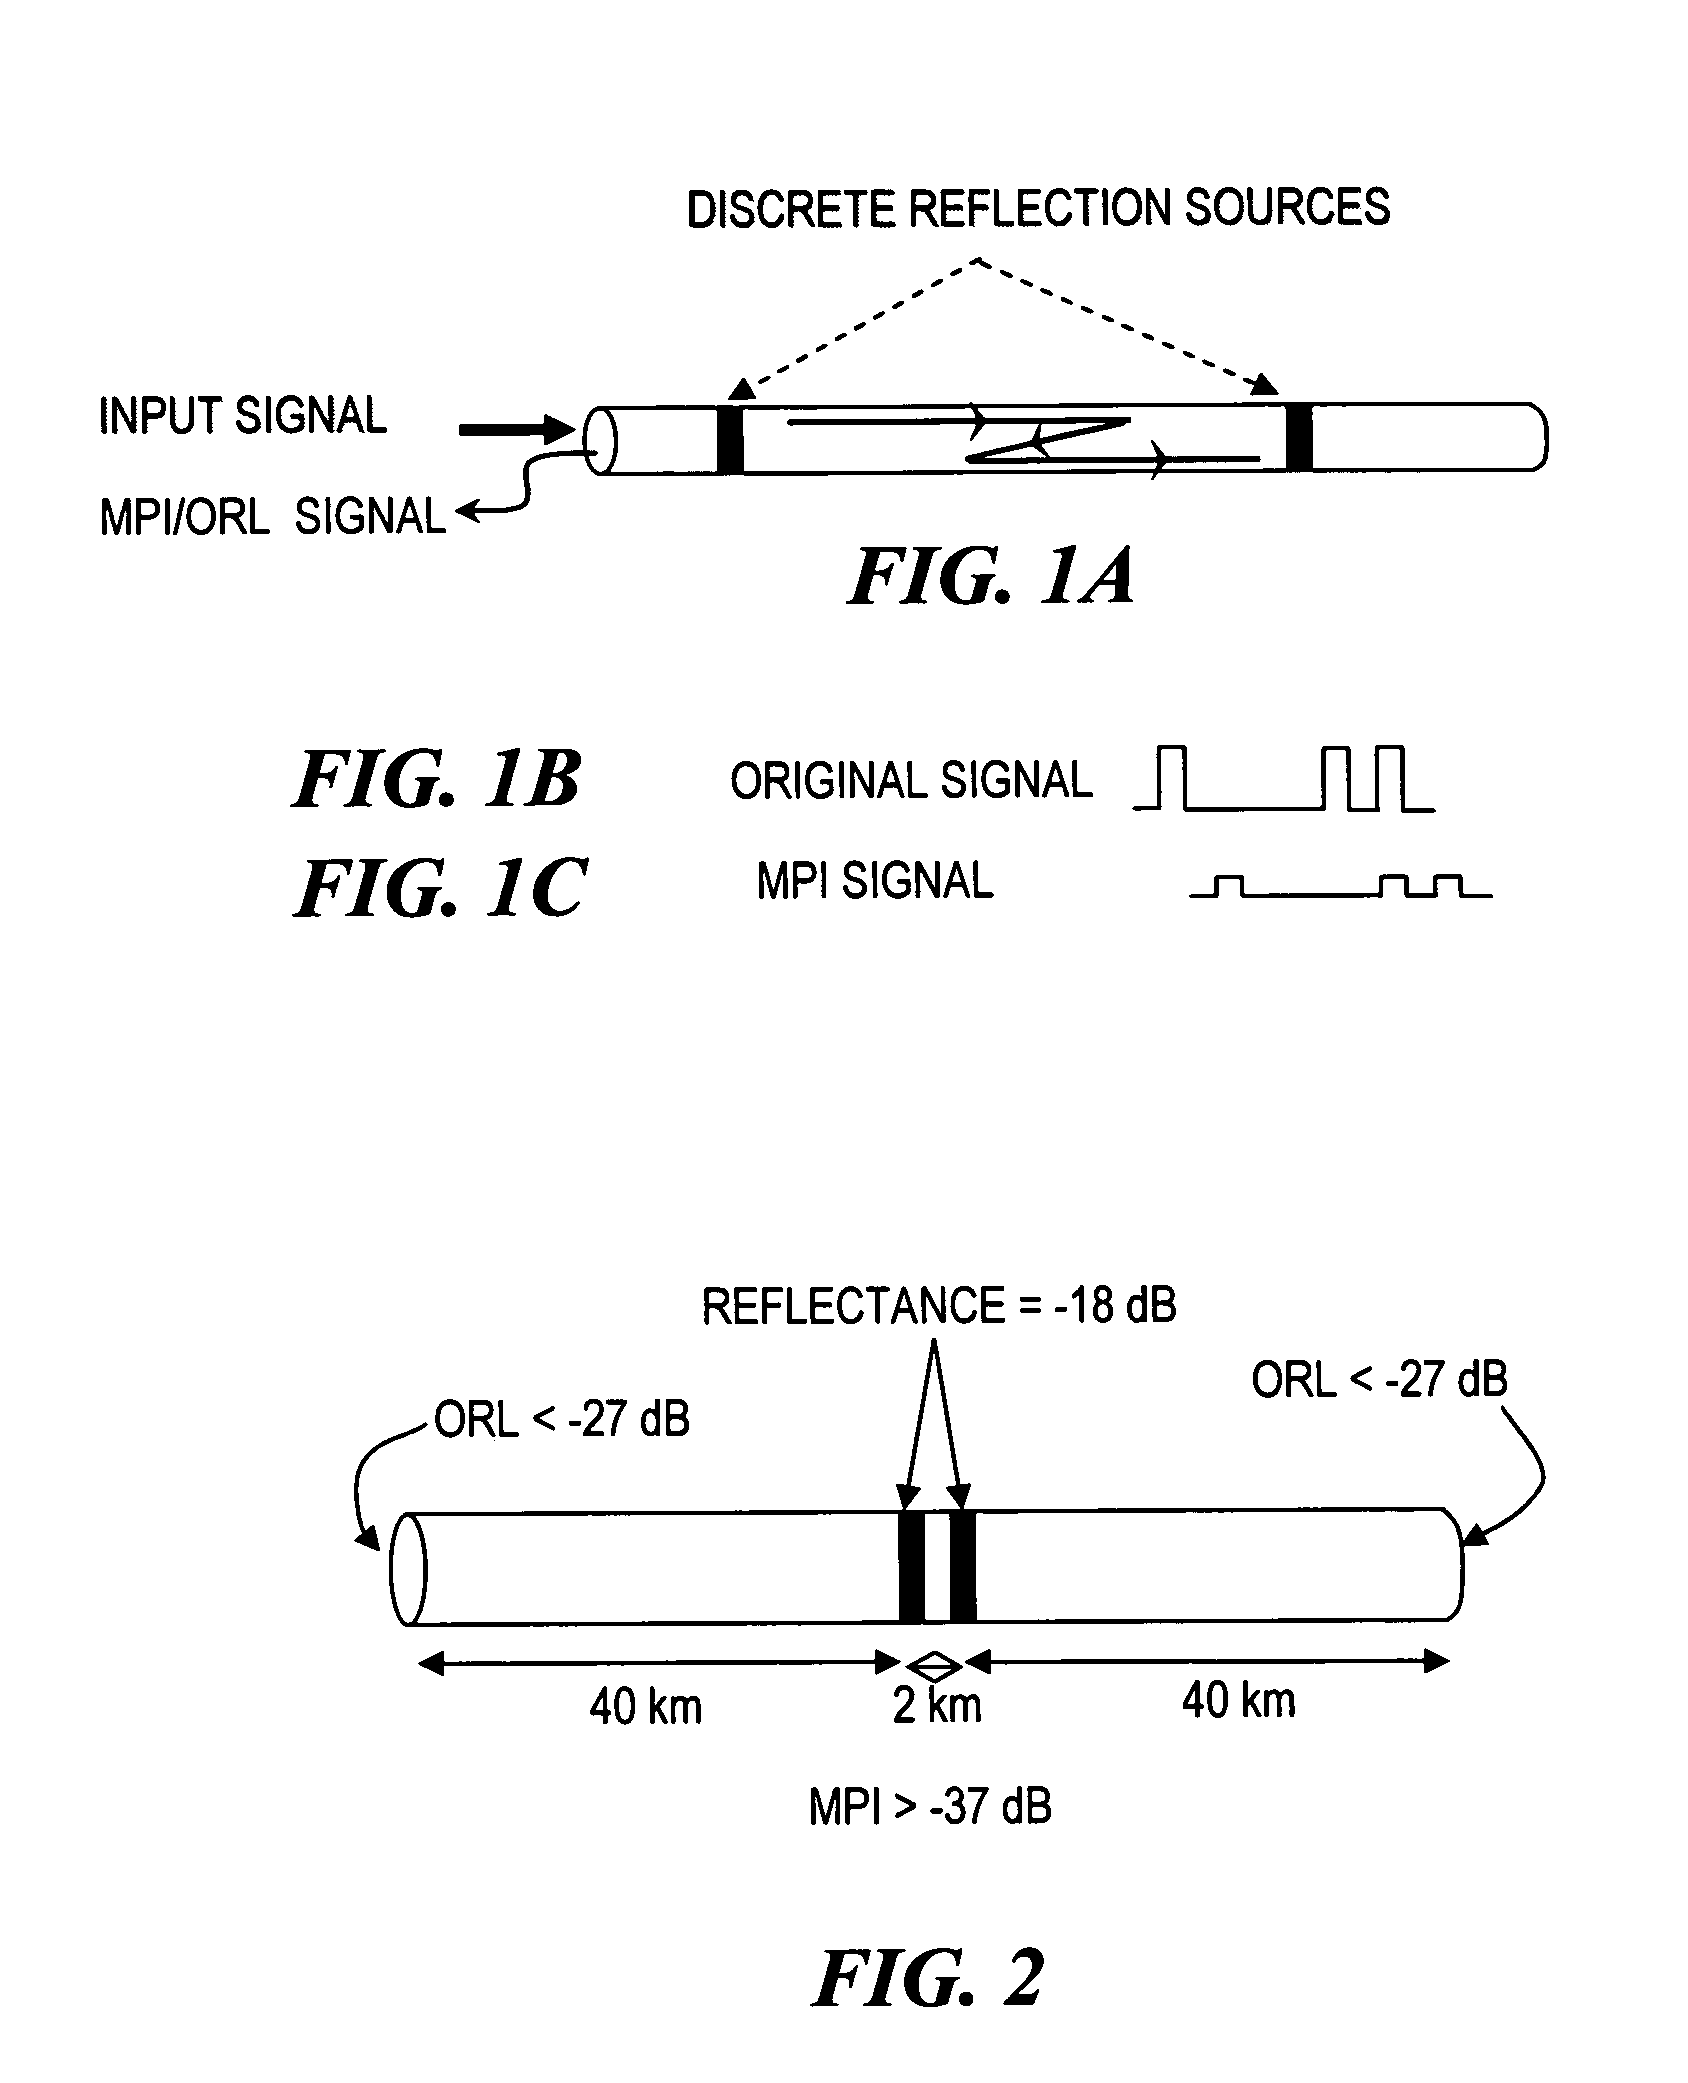 Arrangement for characterizing and reducing multi-path interference (MPI) and/or optical return loss (ORL) in optical transmission links having multiple discrete reflection sources